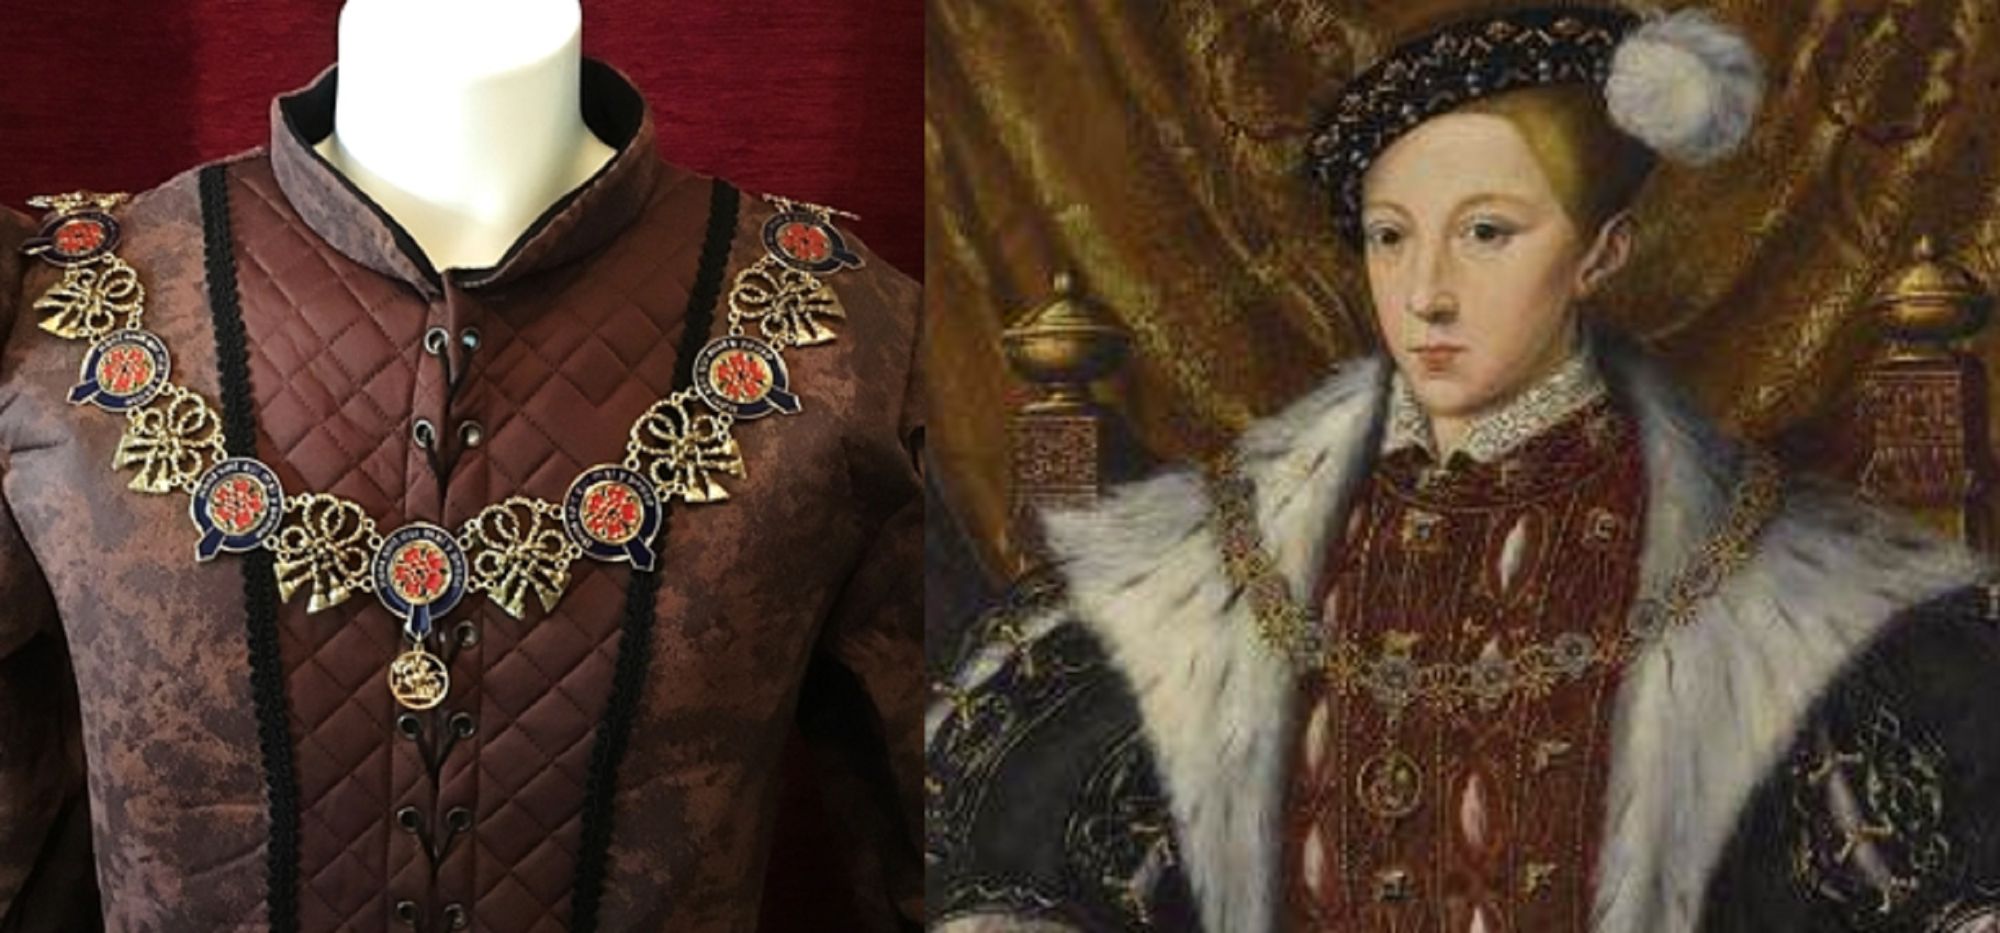 order of the garter with Edward VI